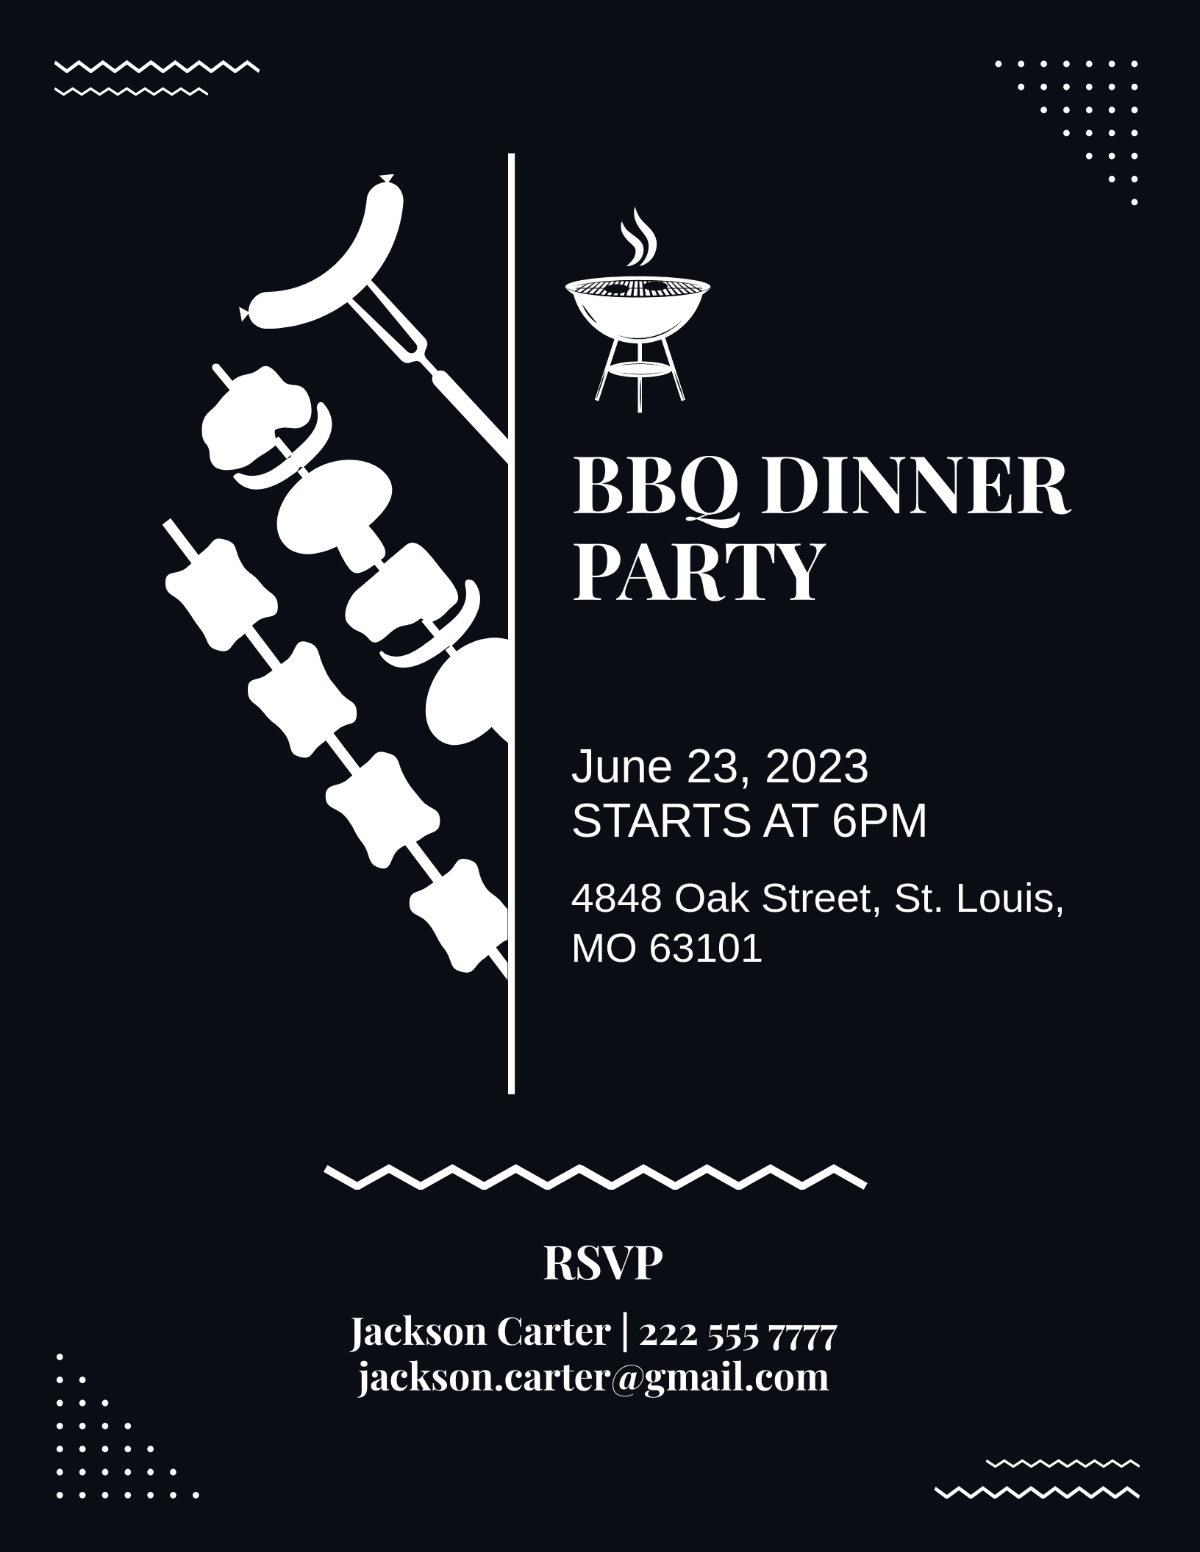 Bbq Dinner Party Flyer